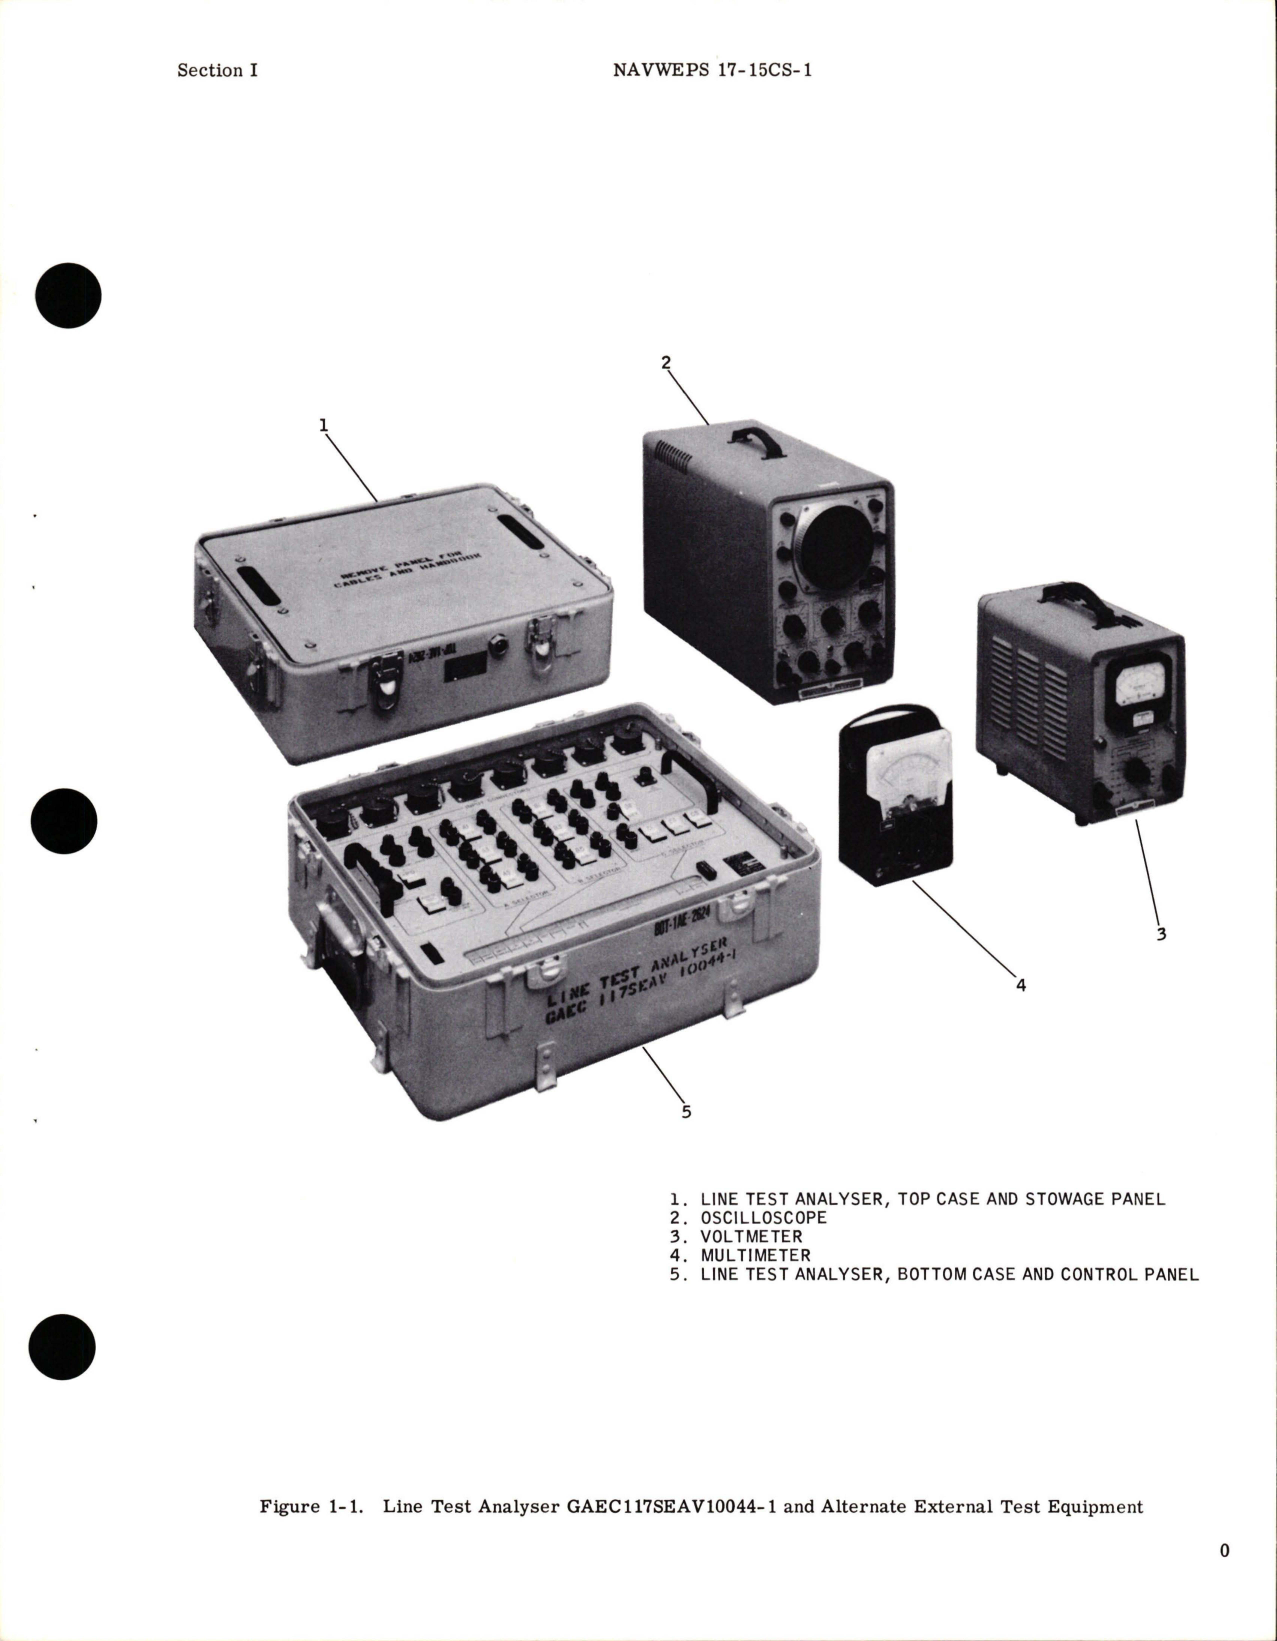 Sample page 7 from AirCorps Library document: Operation, Service and Illustrated Parts Breakdown for Line Test Analyser - GAEC117SEAV 10044-1 - Part 220554